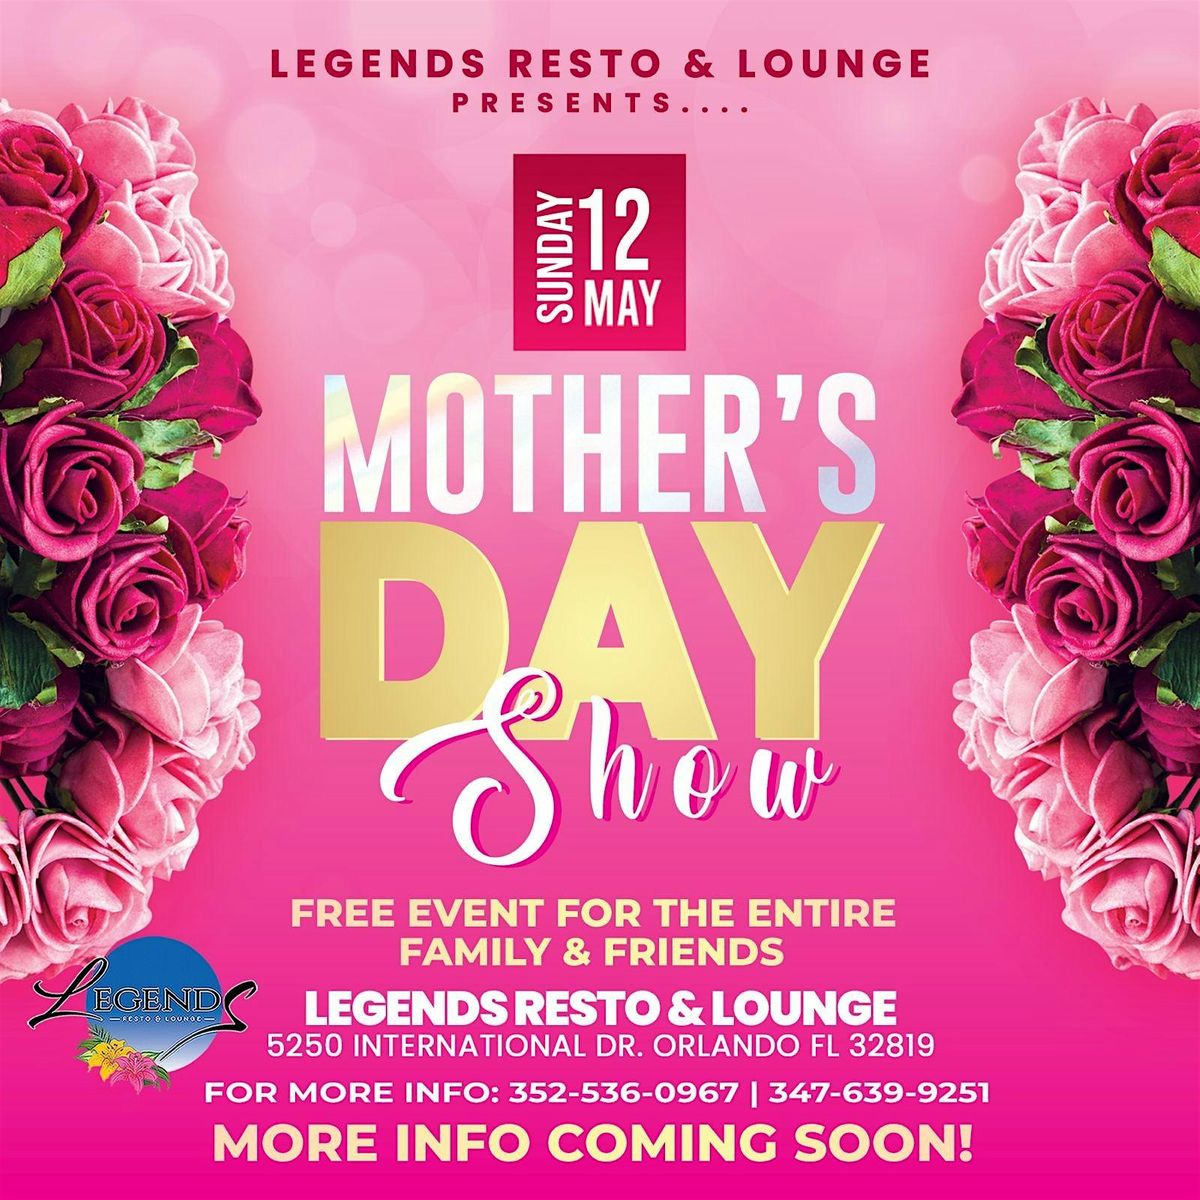 Mothers Day Show by Legends Resto & Lounge